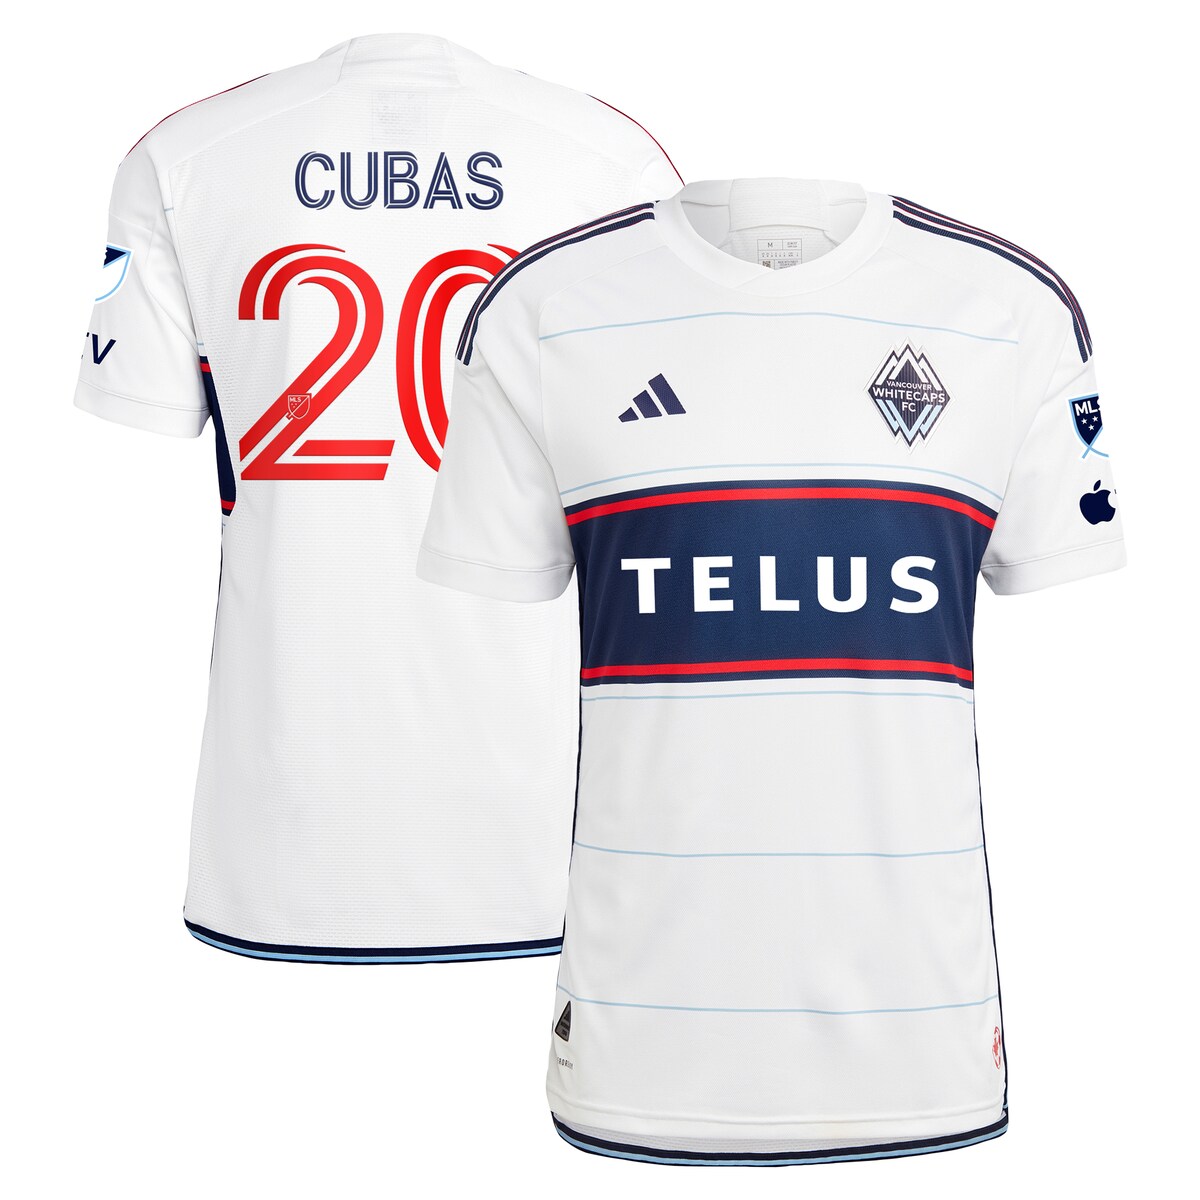 Vancouver Whitecaps FC runs deep in your blood and veins. Show everyone how proud you are of your beloved team by grabbing this Andrs Cubas 2023 Bloodlines Authentic Player Jersey. This kit is part of a collaboration with the Canadian Blood Services and by wearing this jersey, you would be helping to bring awareness to the need of donations all across the Vancouver area. This adidas gear features AEROREADY technology and ventilated, mesh panels that work together to keep you dry and comfortable all game long. Its exciting graphics will help everyone understand just how much Vancouver Whitecaps FC means to you and this great city!Authentic JerseyAEROREADY technology absorbs moisture and makes you feel dryMaterial: 100% PolyesterOfficially licensedEmbroidered adidas logo on right chestHeat-sealed sponsor logo on chestJersey Color Style: PrimaryImportedVentilated mesh panel insertsMachine wash gentle or dry clean. Tumble dry low, hang dry preferred.Tagless collar for added comfortBackneck taping - no irritating stitch on the backSewn on embroidered team crest on left chestBrand: adidas